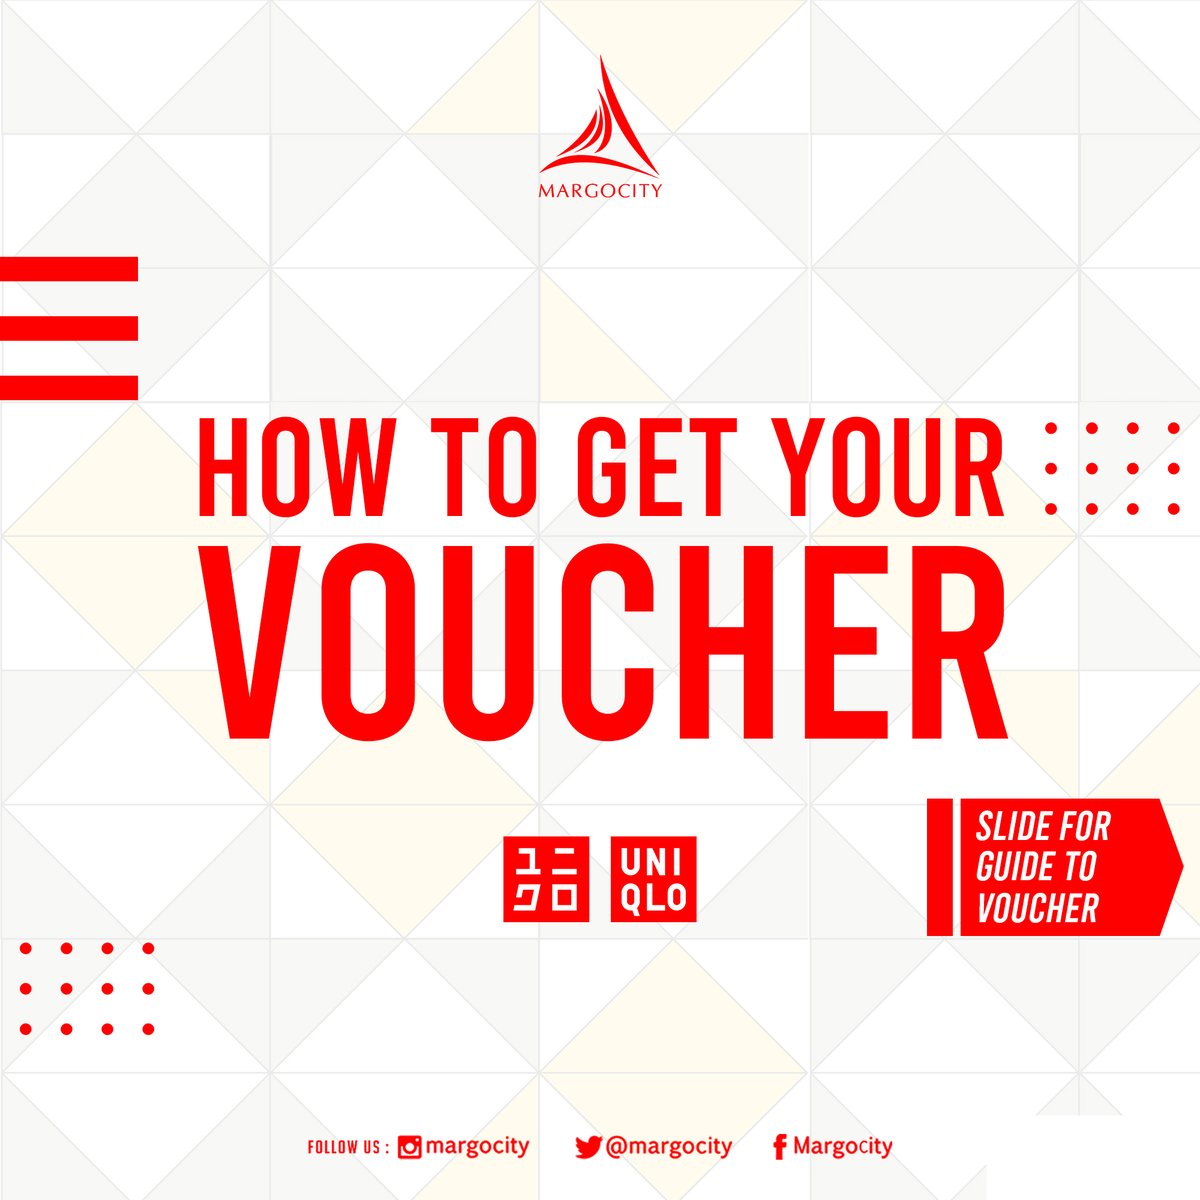 MARGOCITY on Twitter: "Get your cashback voucher of UNIQLO MARGOCITY  special for MARGOCITIZEN member and here are the steps to redeem your  cashback voucher. Please don't forget to prioritize your safety and